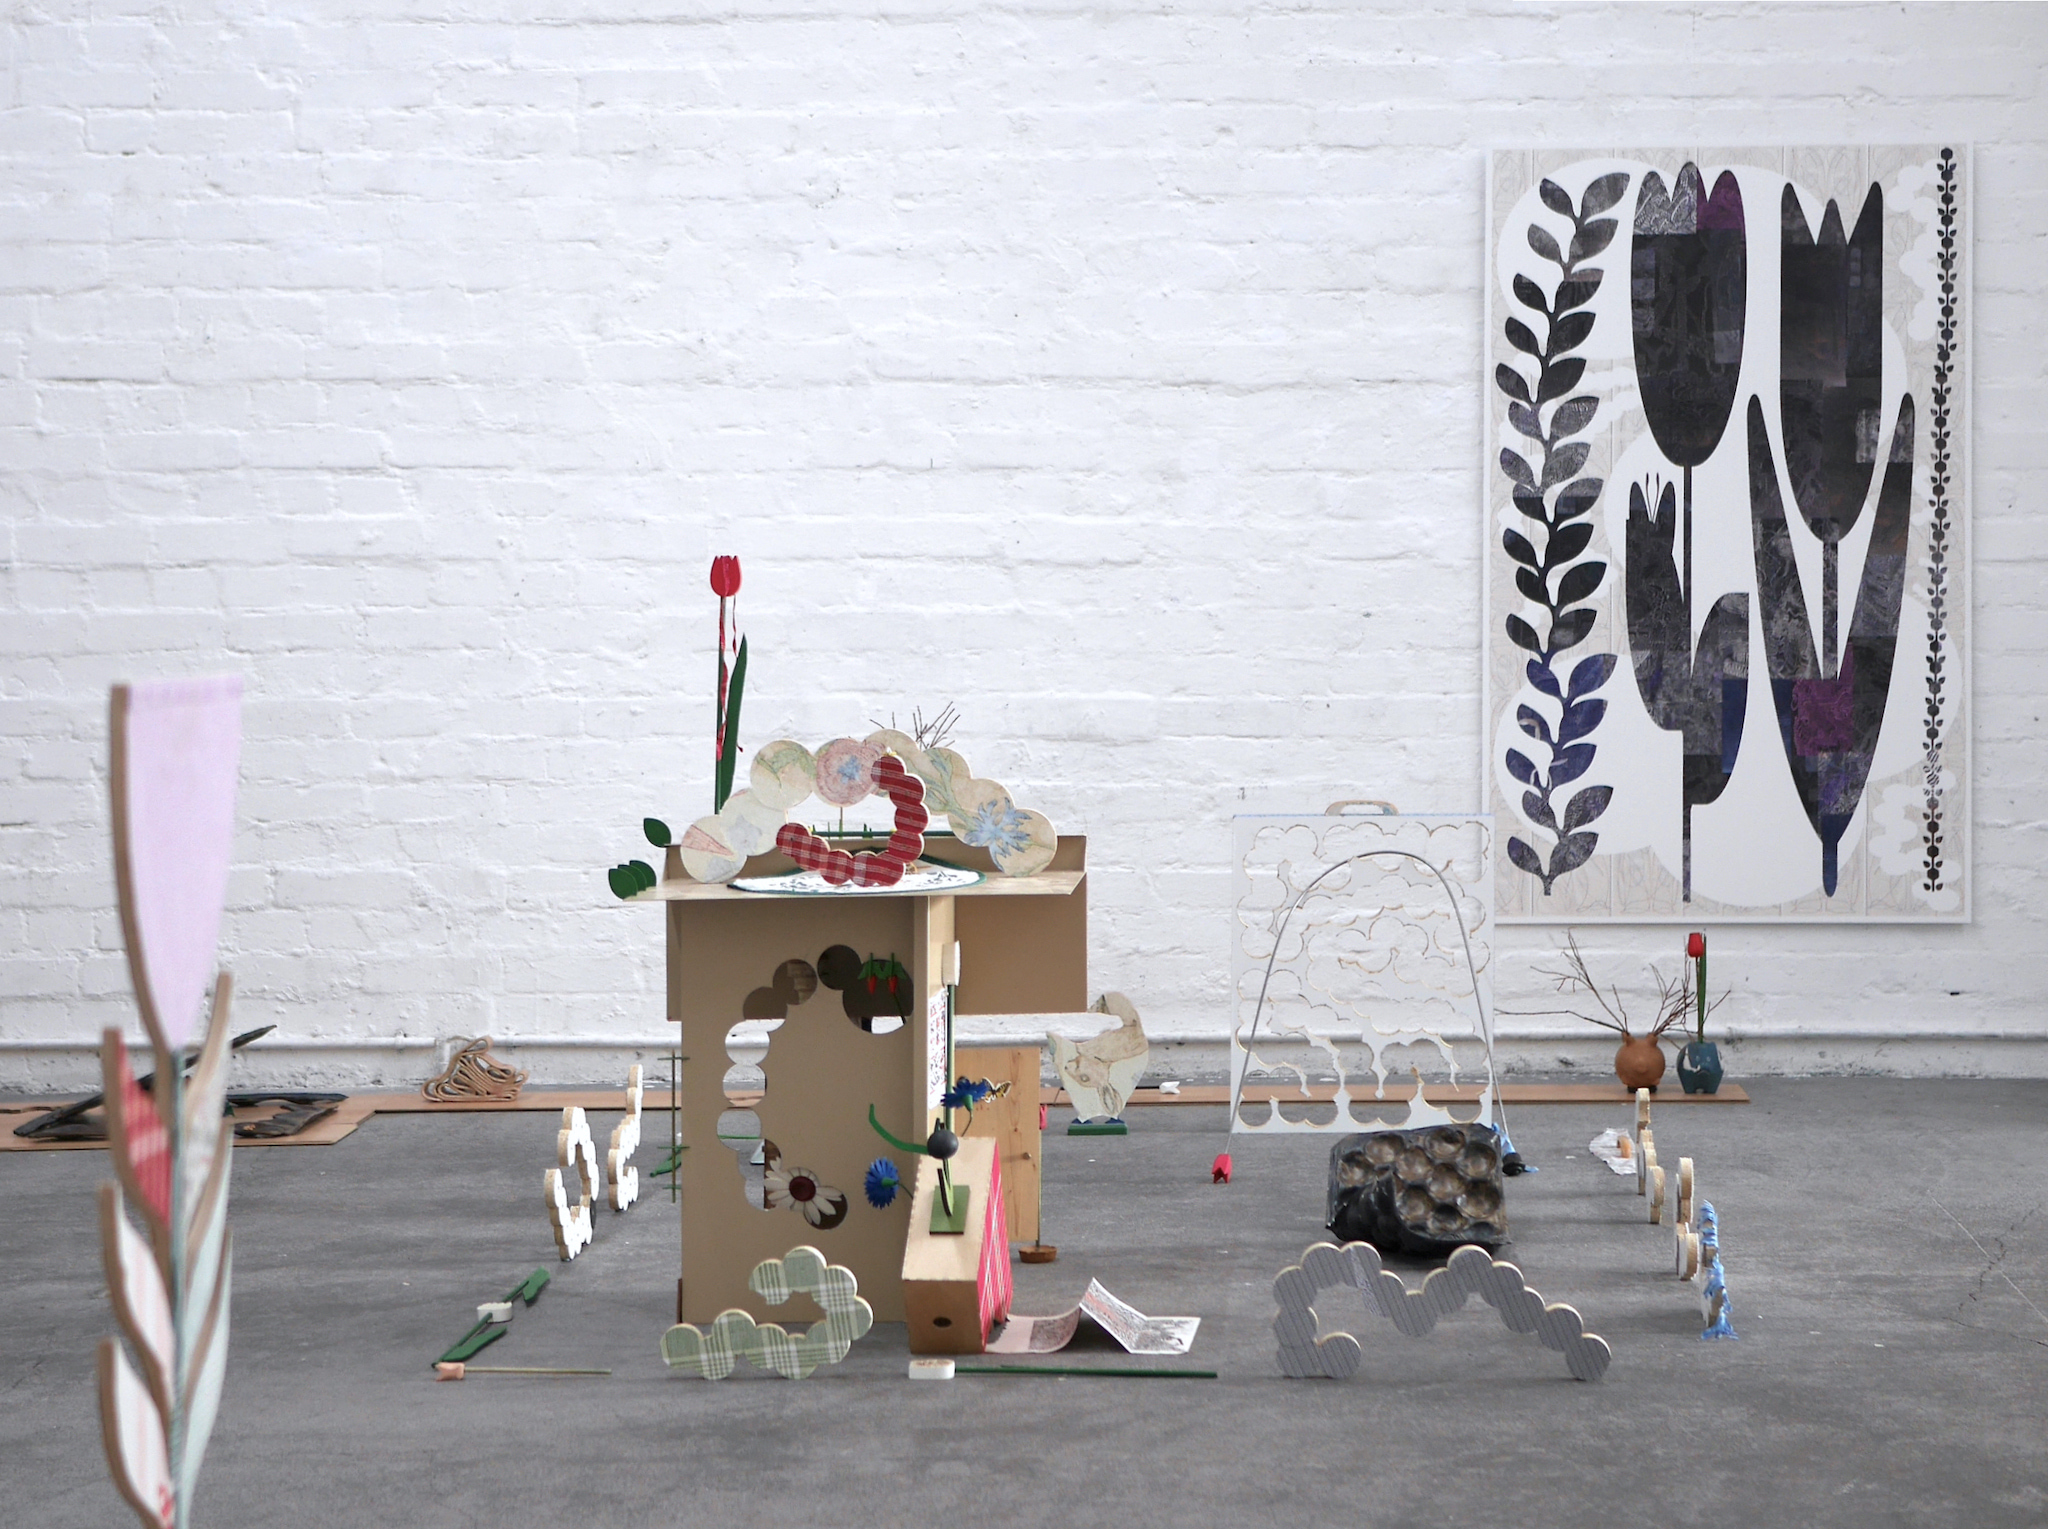 The dawn of everything; Series of cutout caterpillars: furniture-board, textile / Assemblage: painted steel, wood, furniture- board, textile, wooden flowers, drawing on a map and lotto ticket, miscellaneous objects, 2023